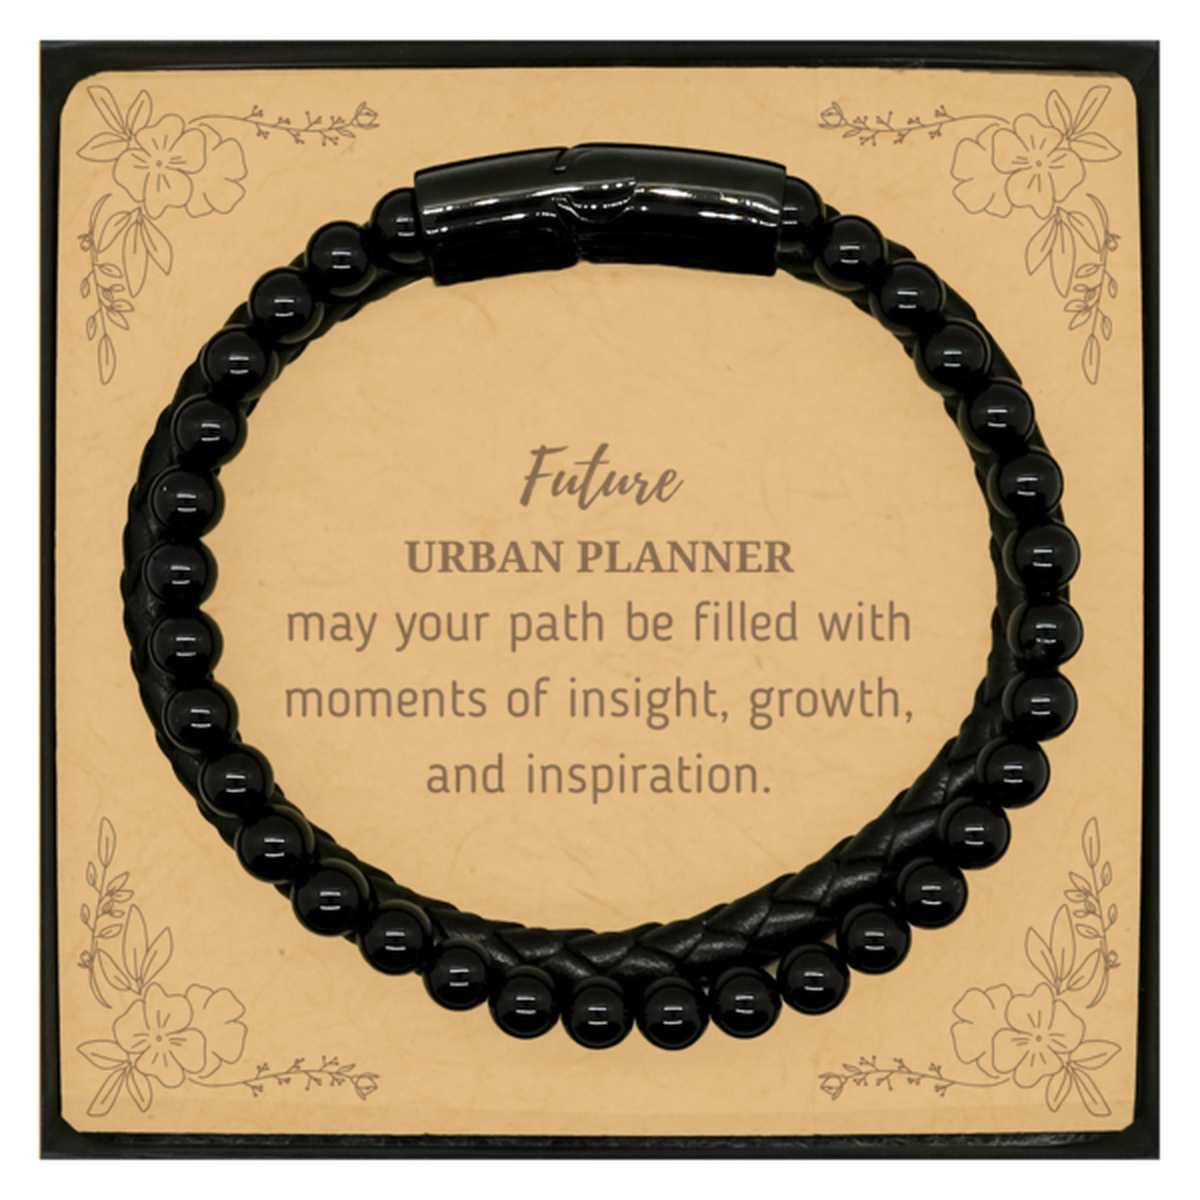 Future Urban Planner Gifts, May your path be filled with moments of insight, Graduation Gifts for New Urban Planner, Christmas Unique Stone Leather Bracelets For Men, Women, Friends